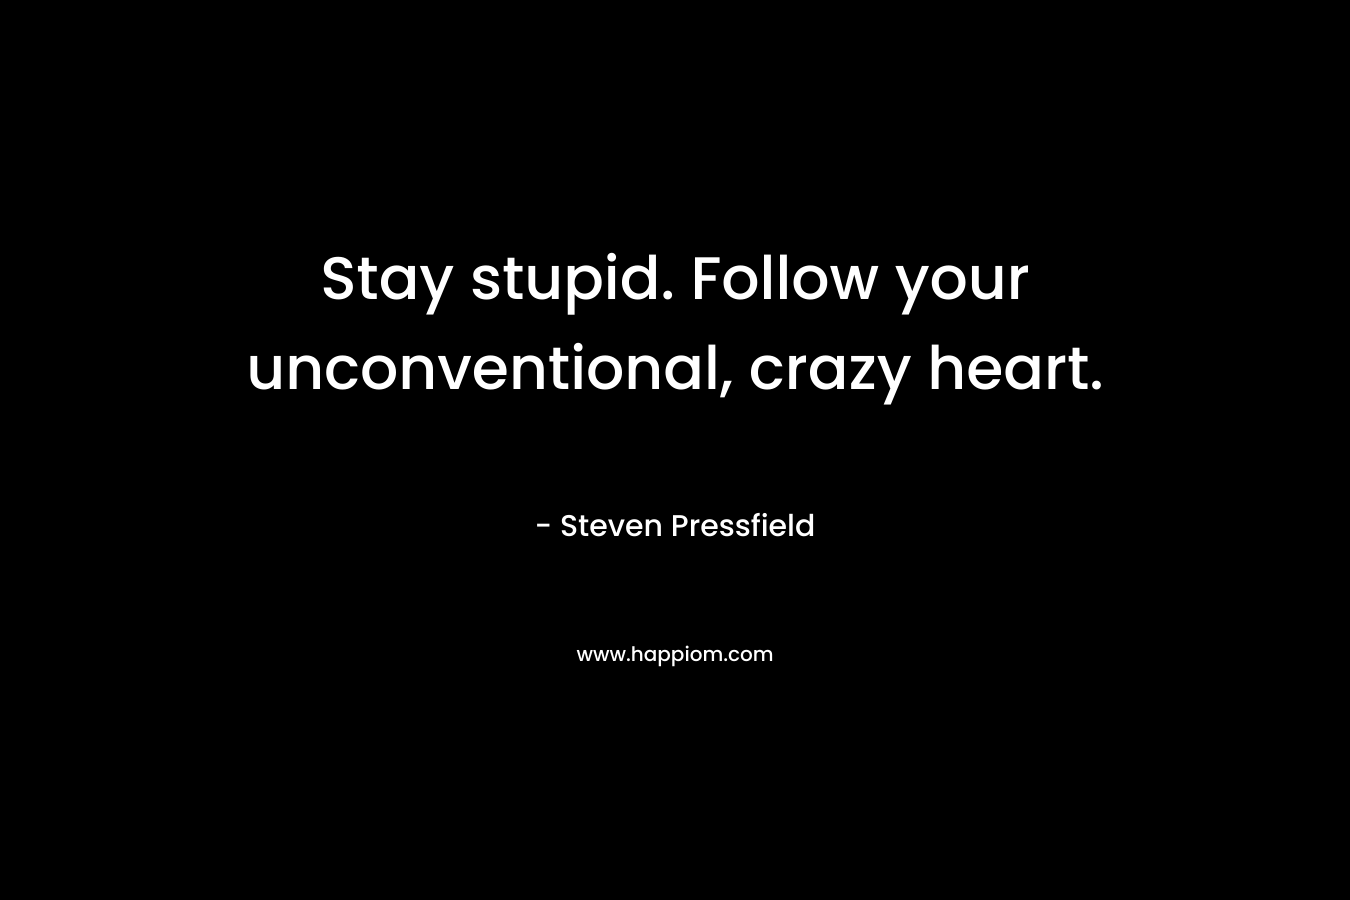 Stay stupid. Follow your unconventional, crazy heart. – Steven Pressfield